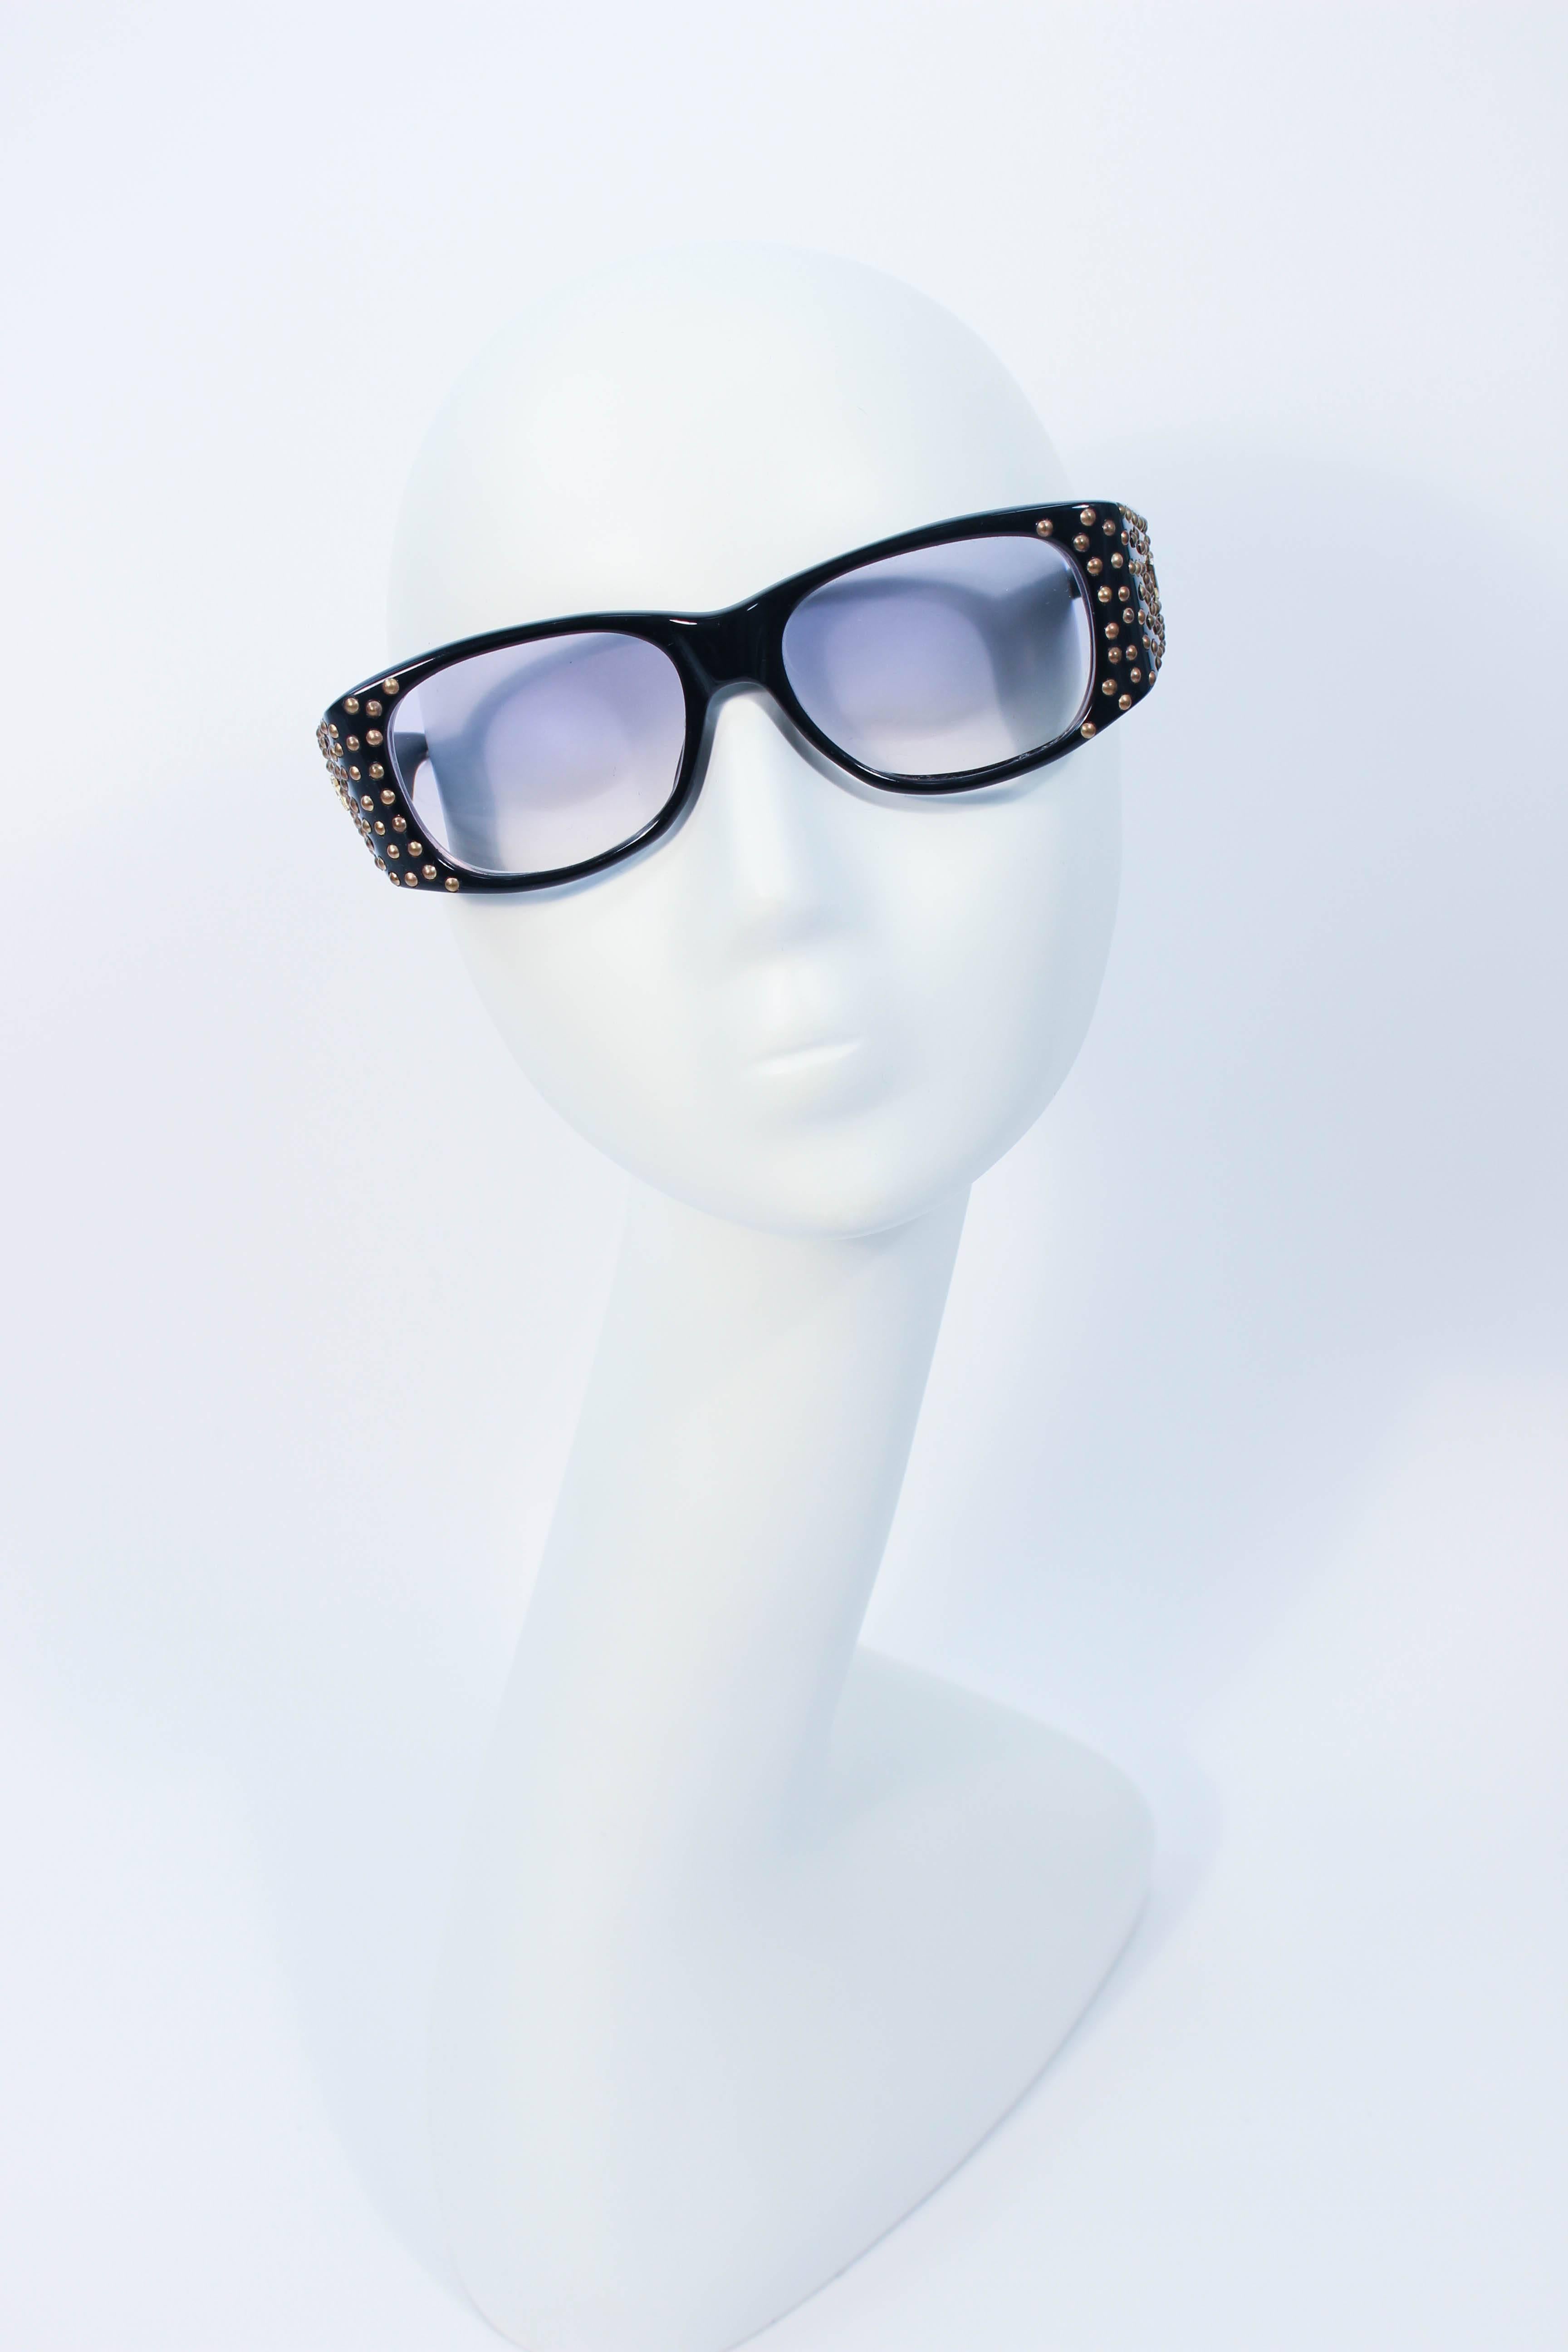 These Emmanuelle Khanh black plastic sunglasses feature gold stud details and the classic 